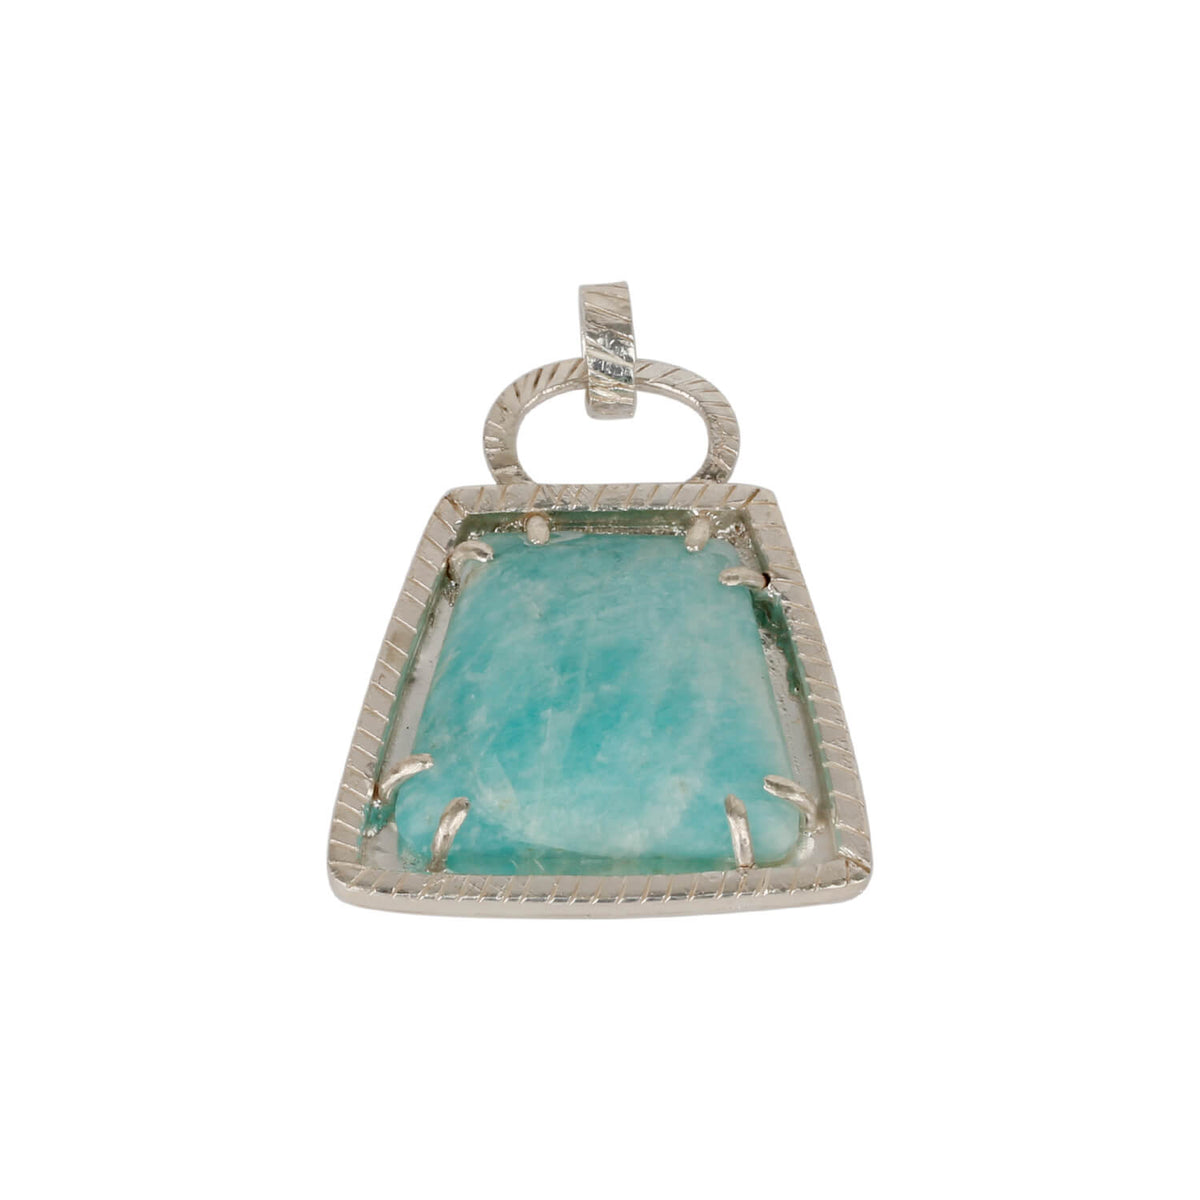 Rhombus Amazonite Pendant, Silver Necklaces, Earrings, Rings, Bangles, Pendants, And Anklets, Shop, Online, Beauty, Collections, Jewelry store near me, Coral, Buy online jewelry, Buy rings online, Buy earrings online, Buy necklace online, Buy pendant onli